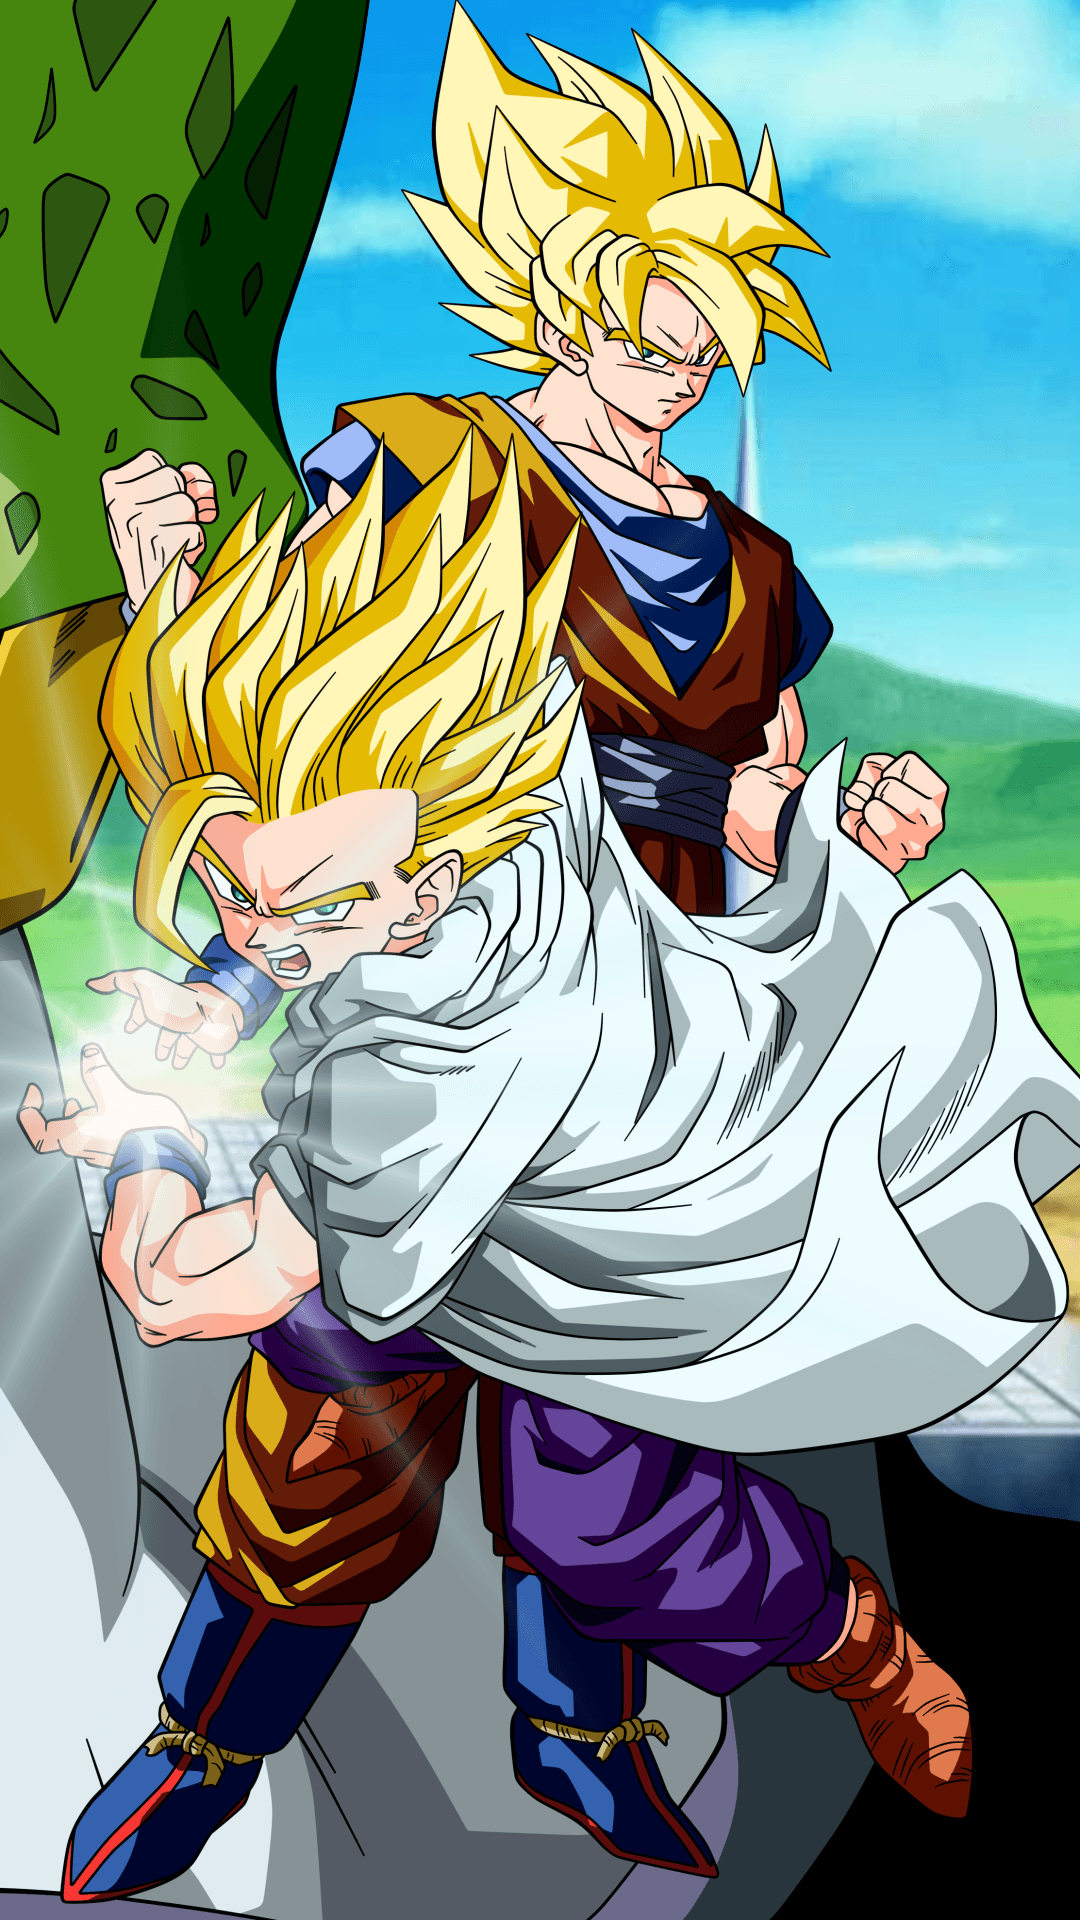 Dragon ball iPhone 6 wallpapers HD – 6 Plus backgrounds